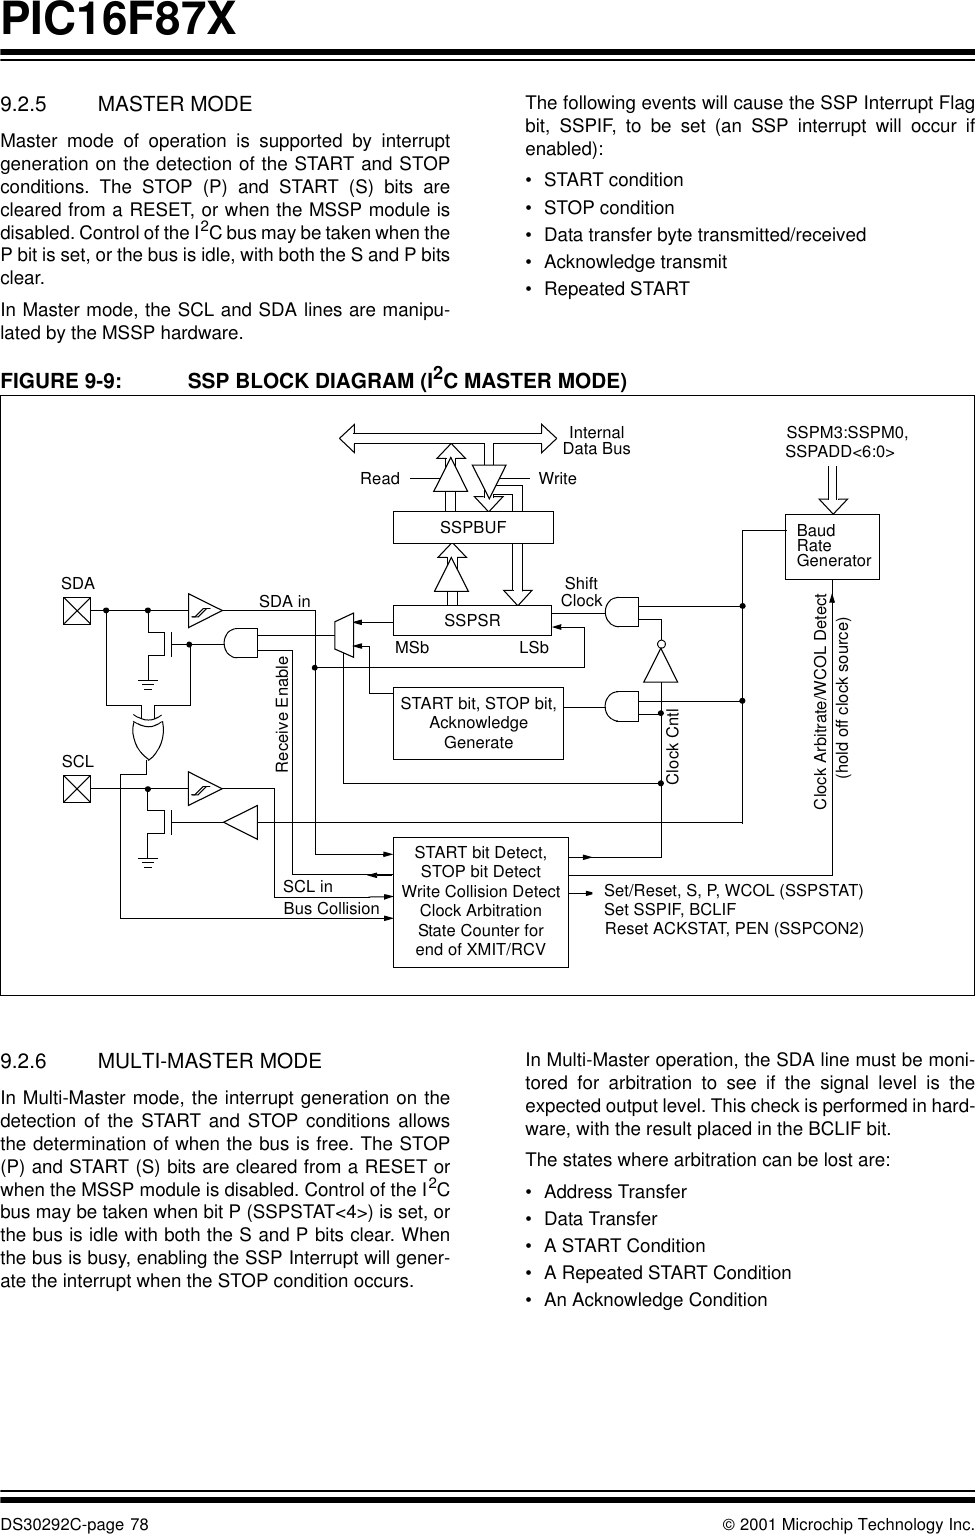 PIC16F87XDS30292C-page 78  2001 Microchip Technology Inc.9.2.5 MASTER MODEMaster mode of operation is supported by interruptgeneration on the detection of the START and STOPconditions. The STOP (P) and START (S) bits arecleared from a RESET, or when the MSSP module isdisabled. Control of the I2C bus may be taken when theP bit is set, or the bus is idle, with both the S and P bitsclear.In Master mode, the SCL and SDA lines are manipu-lated by the MSSP hardware. The following events will cause the SSP Interrupt Flagbit, SSPIF, to be set (an SSP interrupt will occur ifenabled):•START condition•STOP condition•Data transfer byte transmitted/received•Acknowledge transmit•Repeated STARTFIGURE 9-9: SSP BLOCK DIAGRAM (I2C MASTER MODE)         9.2.6 MULTI-MASTER MODEIn Multi-Master mode, the interrupt generation on thedetection of the START and STOP conditions allowsthe determination of when the bus is free. The STOP(P) and START (S) bits are cleared from a RESET orwhen the MSSP module is disabled. Control of the I2Cbus may be taken when bit P (SSPSTAT&lt;4&gt;) is set, orthe bus is idle with both the S and P bits clear. Whenthe bus is busy, enabling the SSP Interrupt will gener-ate the interrupt when the STOP condition occurs.In Multi-Master operation, the SDA line must be moni-tored for arbitration to see if the signal level is theexpected output level. This check is performed in hard-ware, with the result placed in the BCLIF bit.The states where arbitration can be lost are:•Address Transfer •Data Transfer•A START Condition •A Repeated START Condition•An Acknowledge ConditionRead WriteSSPSRSTART bit, STOP bit,SSPBUFInternalData BusSet/Reset, S, P, WCOL (SSPSTAT)ShiftClockMSb LSbSDAAcknowledgeGenerateSCLSCL inBus CollisionSDA inReceive EnableClock CntlClock Arbitrate/WCOL Detect(hold off clock source)SSPADD&lt;6:0&gt;BaudSet SSPIF, BCLIFReset ACKSTAT, PEN (SSPCON2)RateGeneratorSSPM3:SSPM0,START bit Detect,STOP bit DetectWrite Collision DetectClock ArbitrationState Counter forend of XMIT/RCV